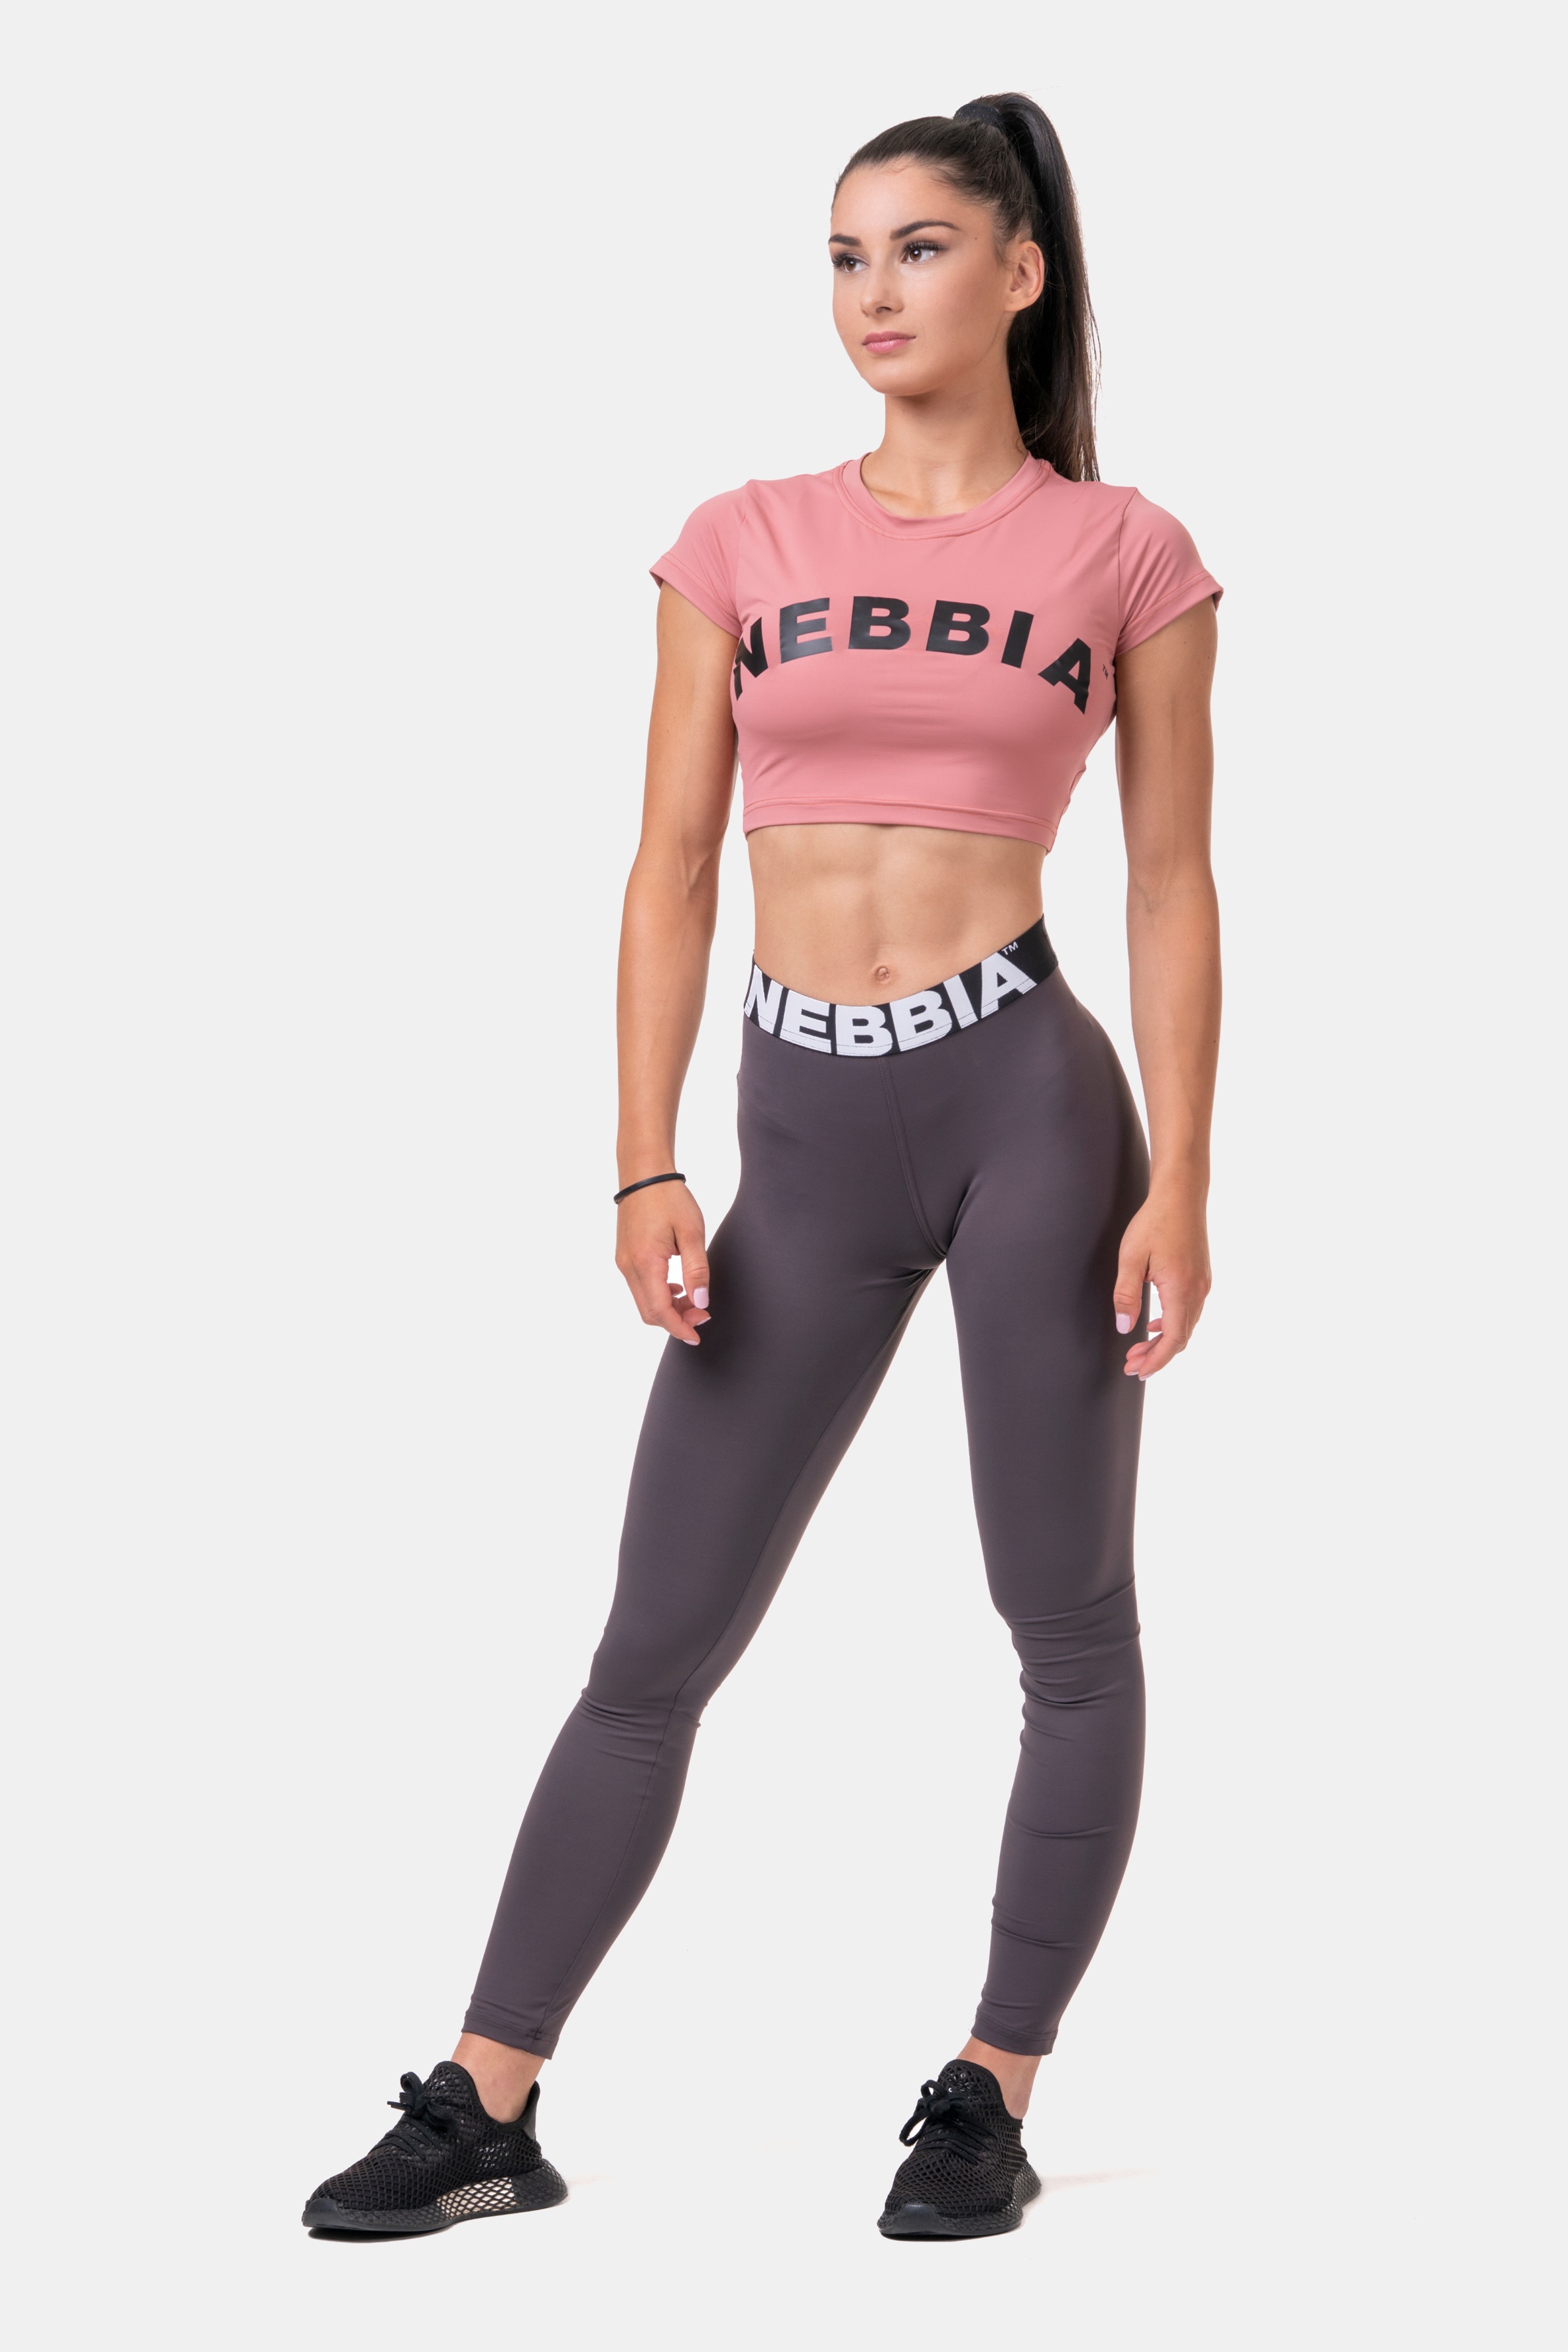 nebbia-sporty-hero-fitness-crop-top-584-old-rose